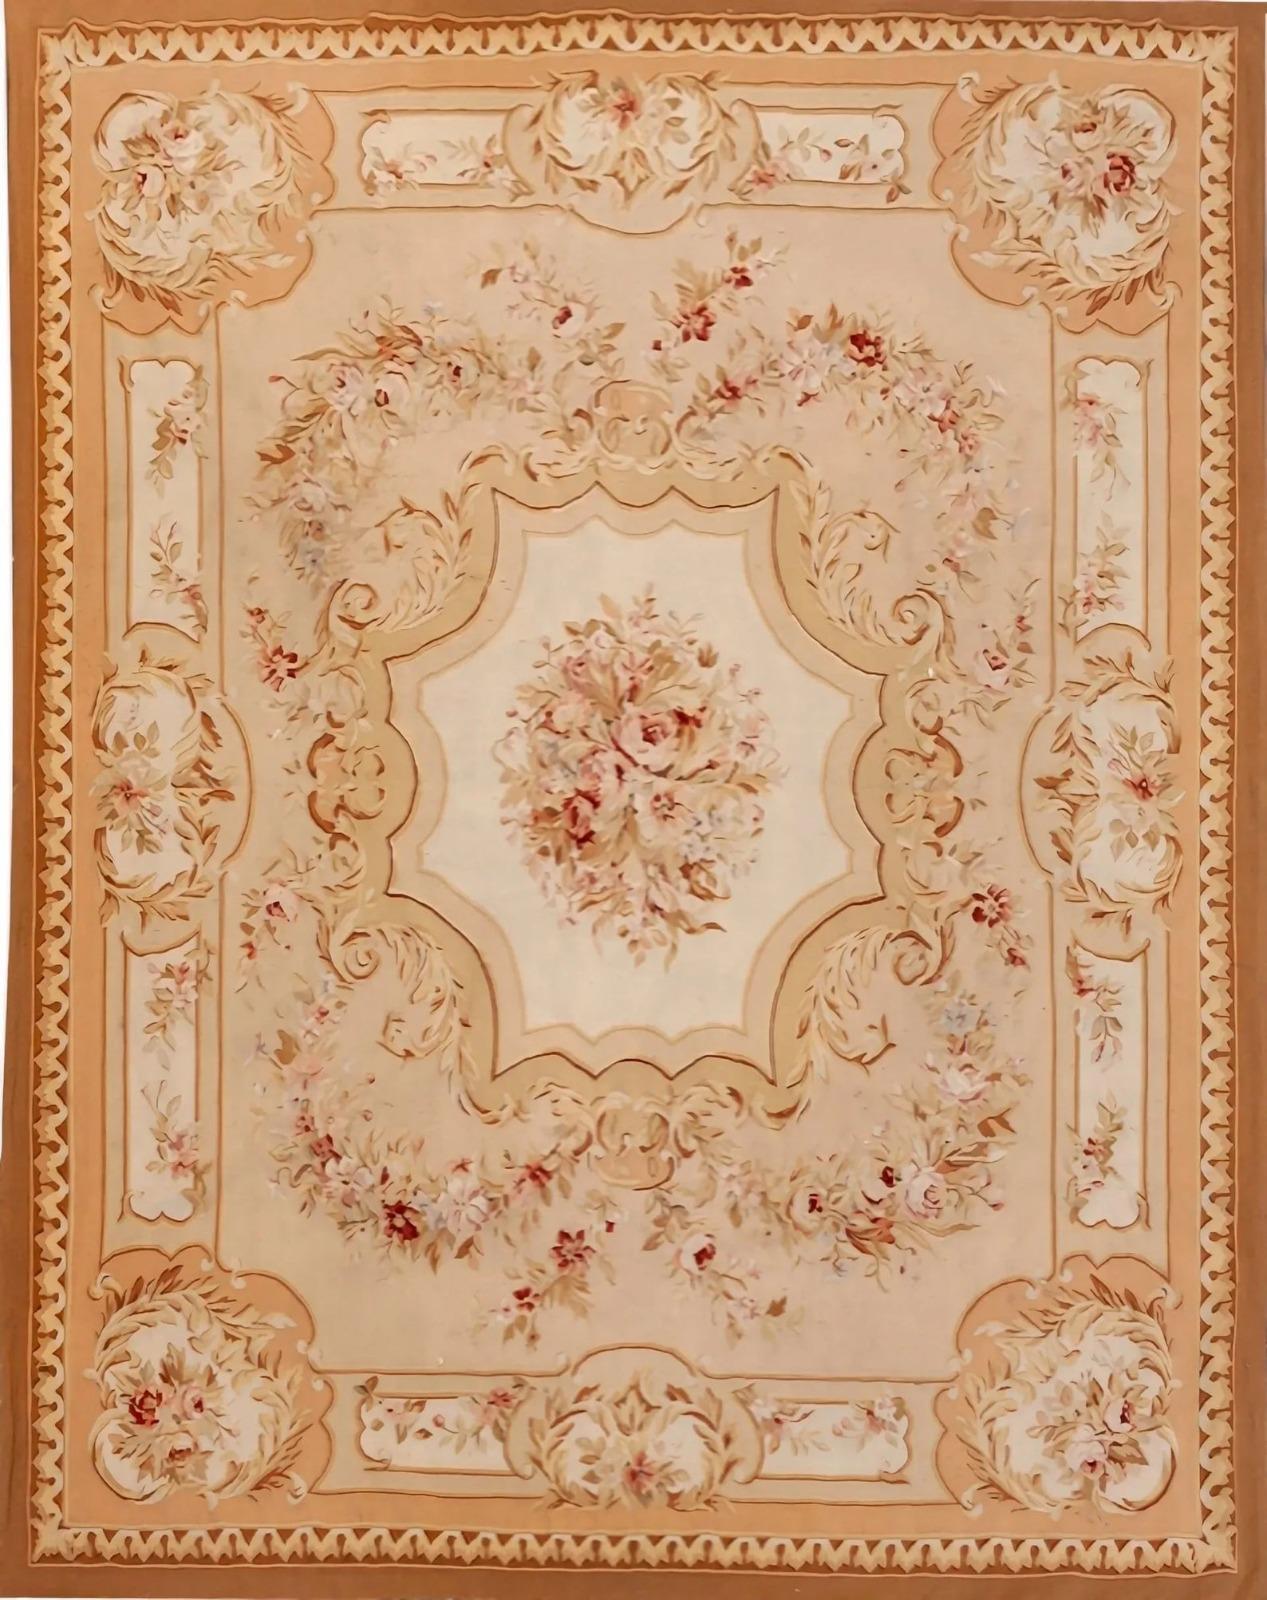 Hand-Crafted French Carpet Aubusson Style, 20th Century